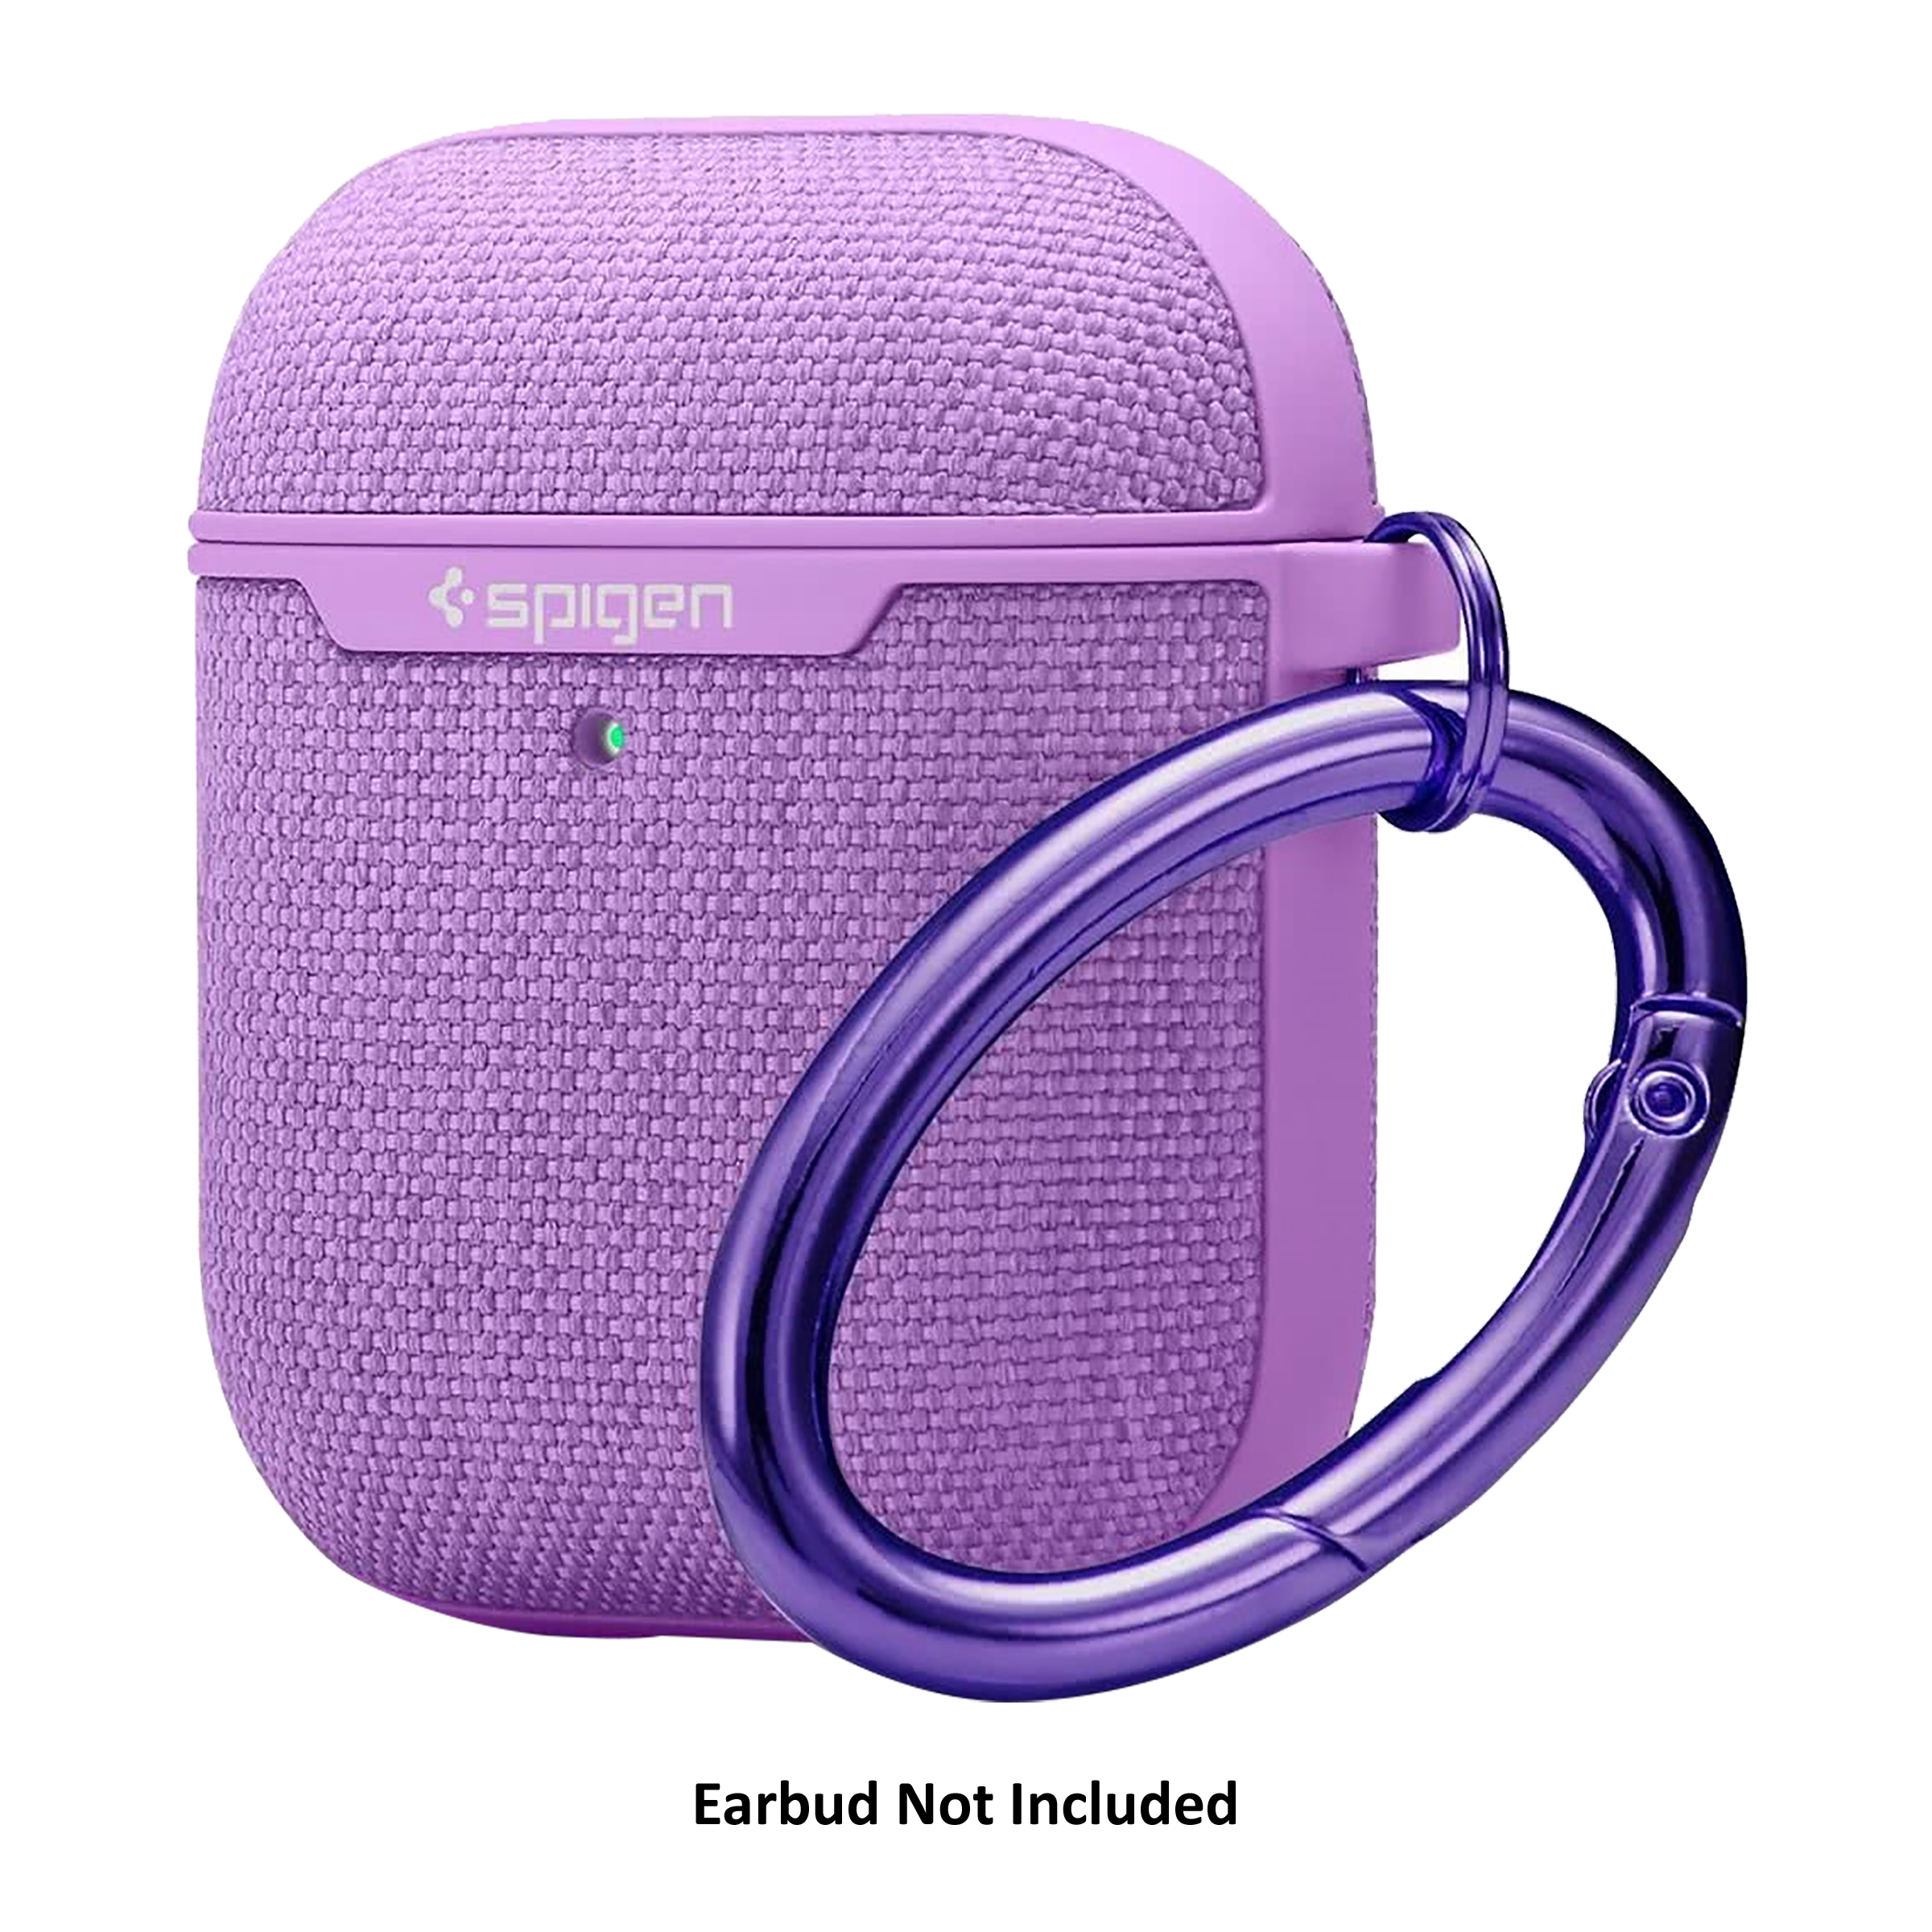 Spigen Urban Fit PC & Fabric Full Cover Case For Apple AirPods 1/2 (Supports LED Light & Wireless Charging, 074CS27599, Purple)_4